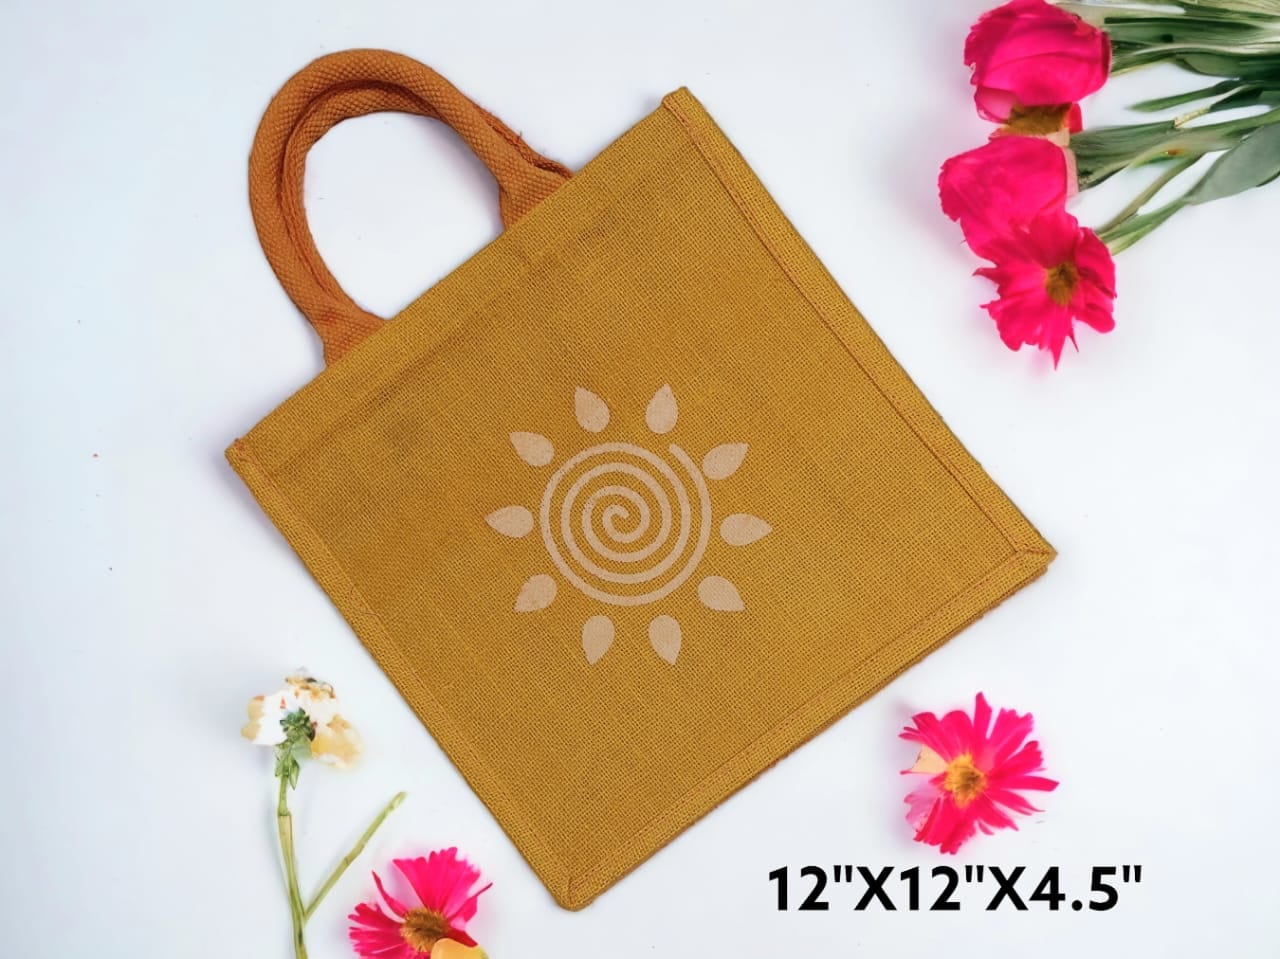 Eco Friendly Gift, Plantable Stationery Kit With Jute Bags, Event Gift,  Corporate Gift, Eco Friendly Gift for Everyone, Return Gift 